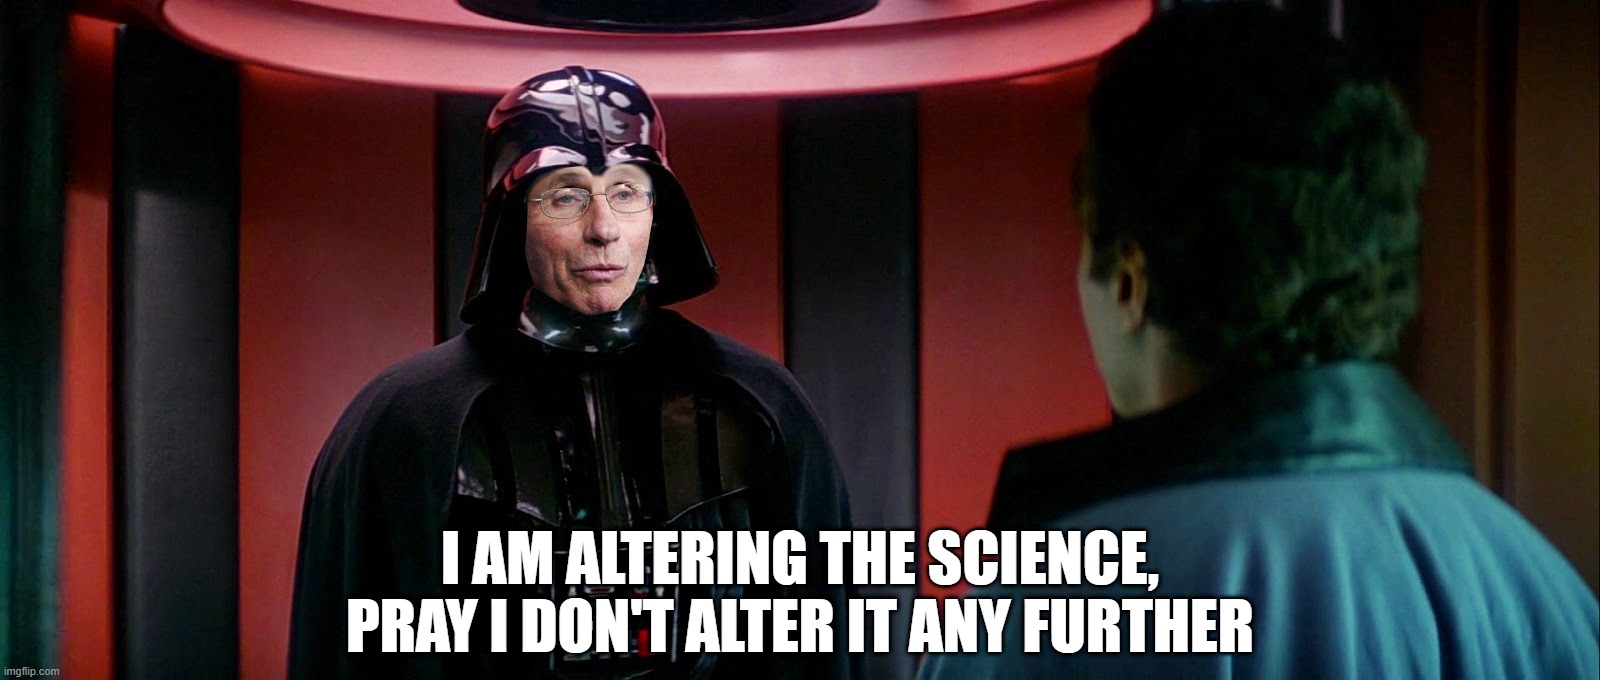 Darth Fauci | I AM ALTERING THE SCIENCE,
PRAY I DON'T ALTER IT ANY FURTHER | image tagged in fauci,darth vader,science,masks,vaccines,tyranny | made w/ Imgflip meme maker